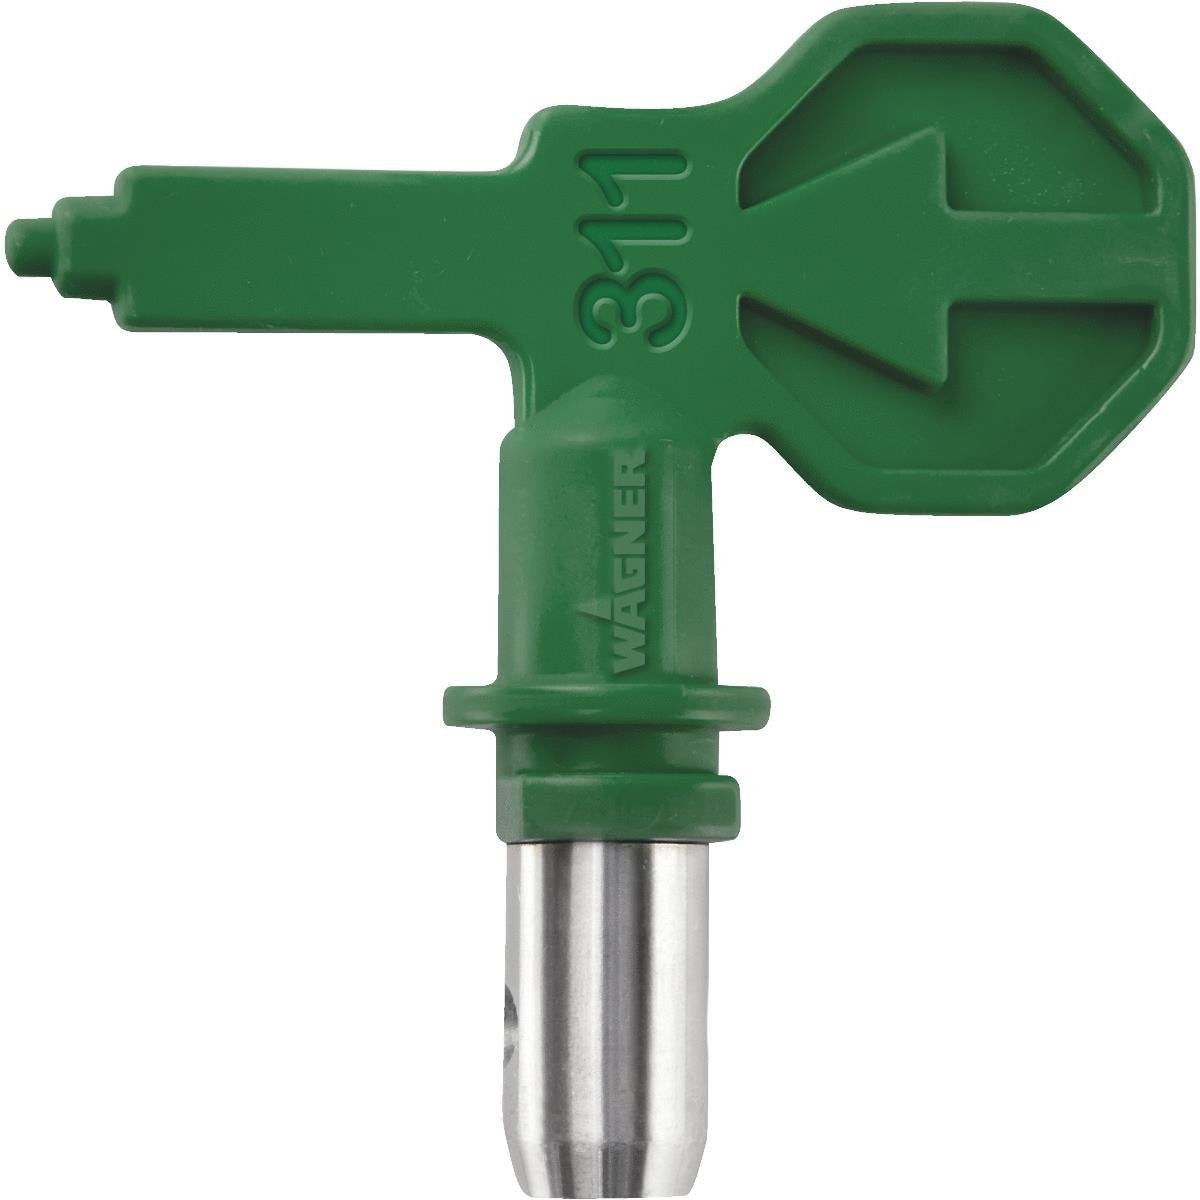 Wagner 0580603 Control Pro 311 Airless Spray Tip, 1600 psi